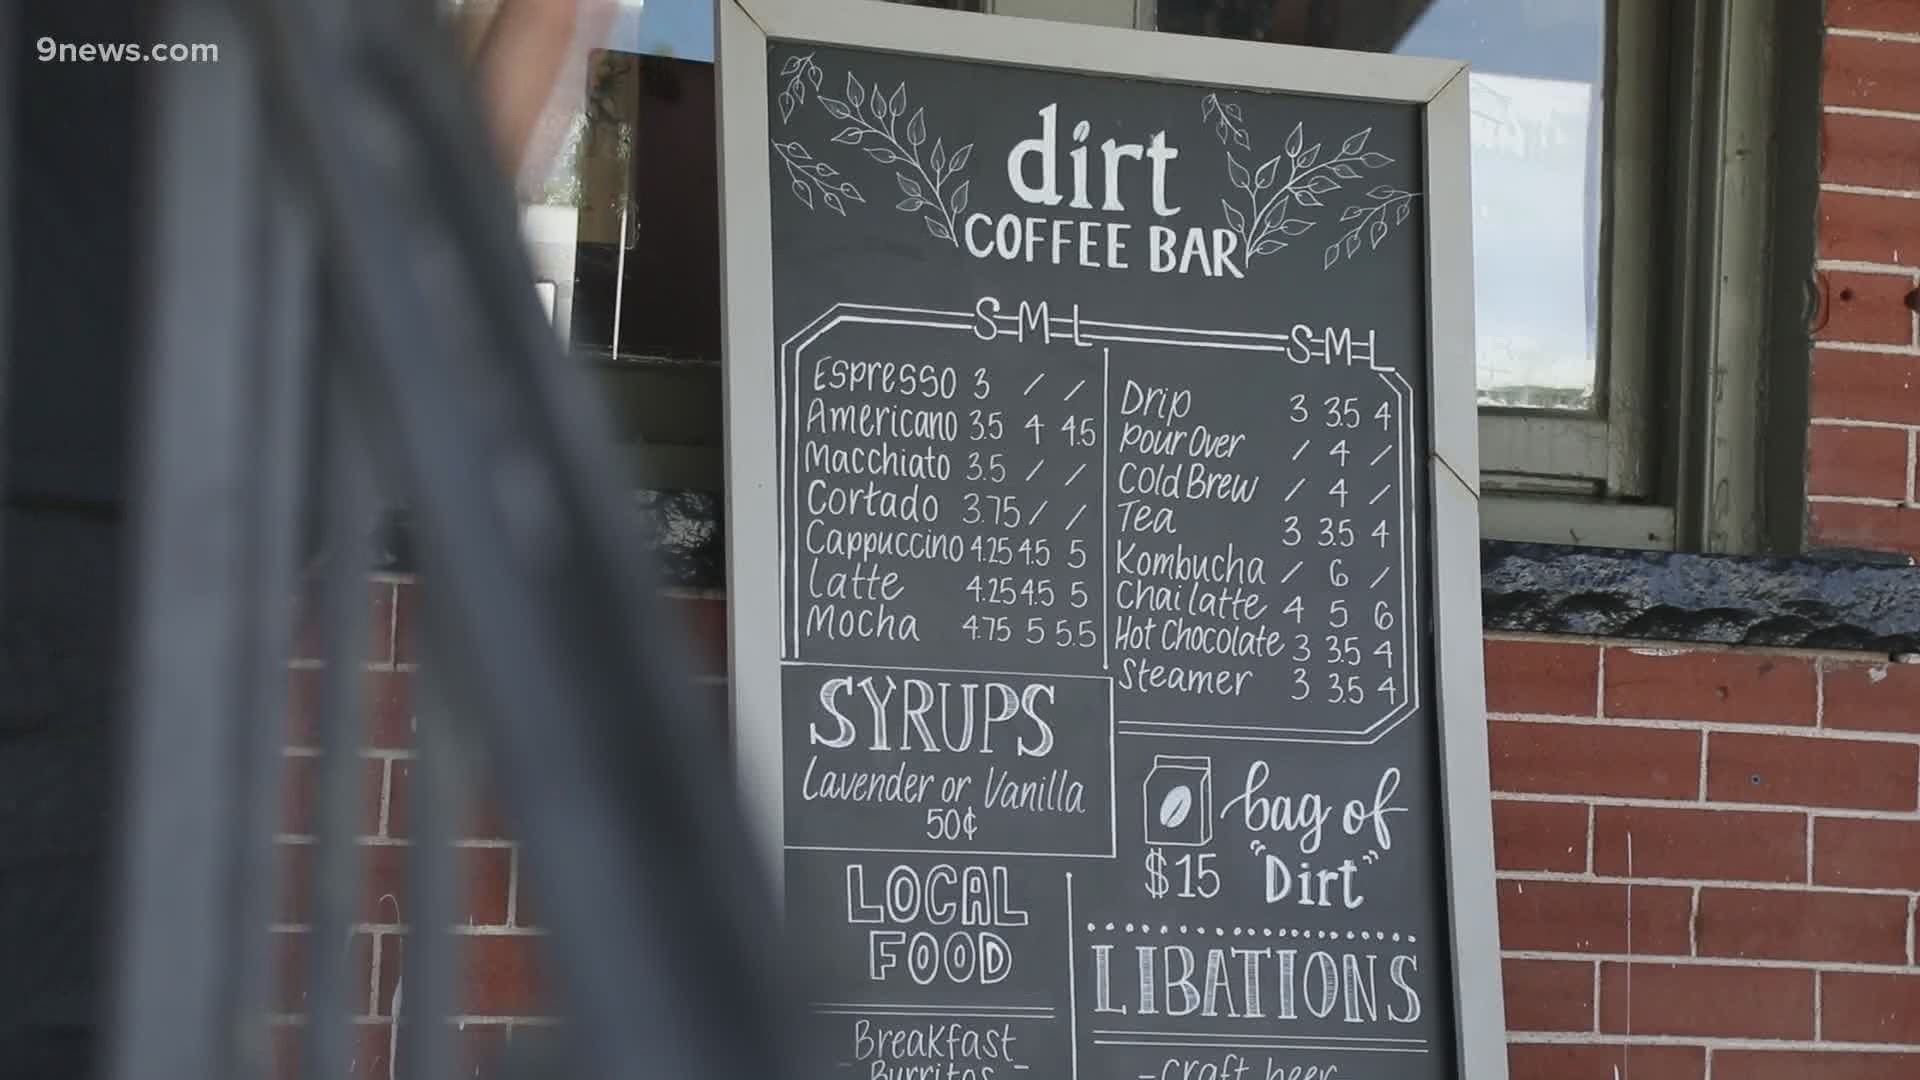 Dirt in Littleton, a coffee shop that employees people with neurodisabilities like autism, is among many businesses being hit hard by the coronavirus pandemic.